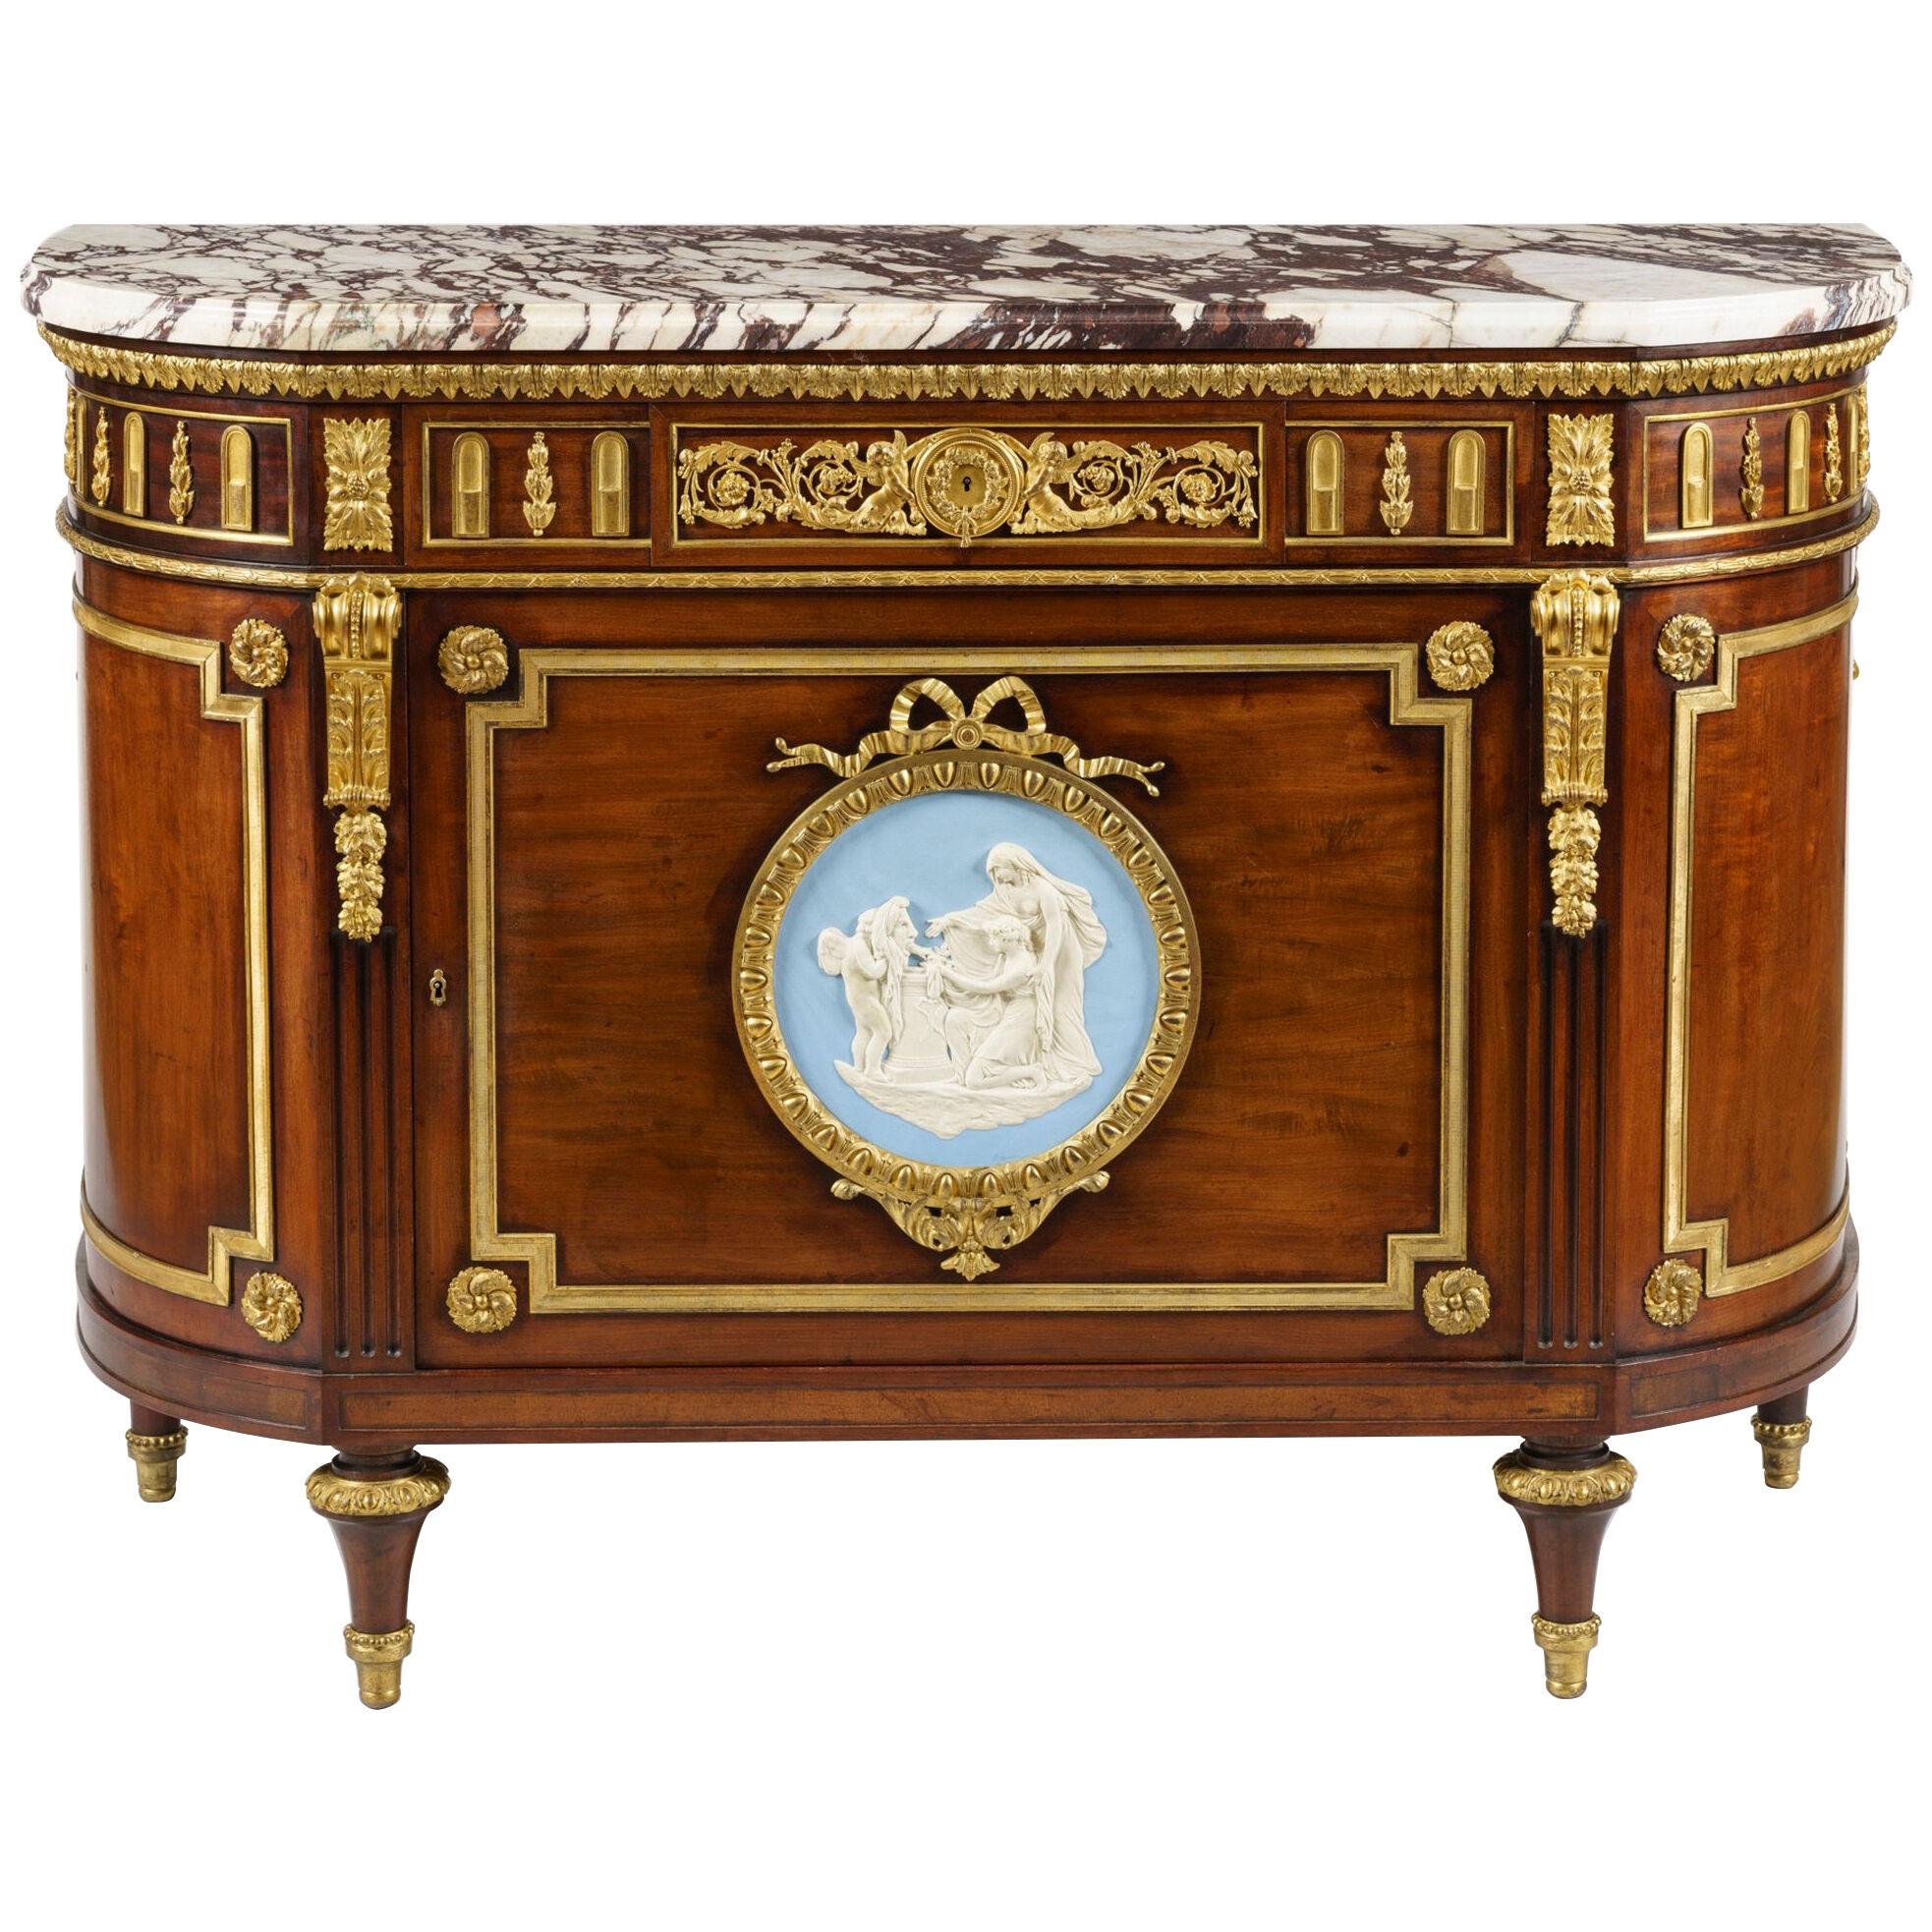 Wedgwood-Mounted Mahogany Commode Attributed to Julius Zwiener